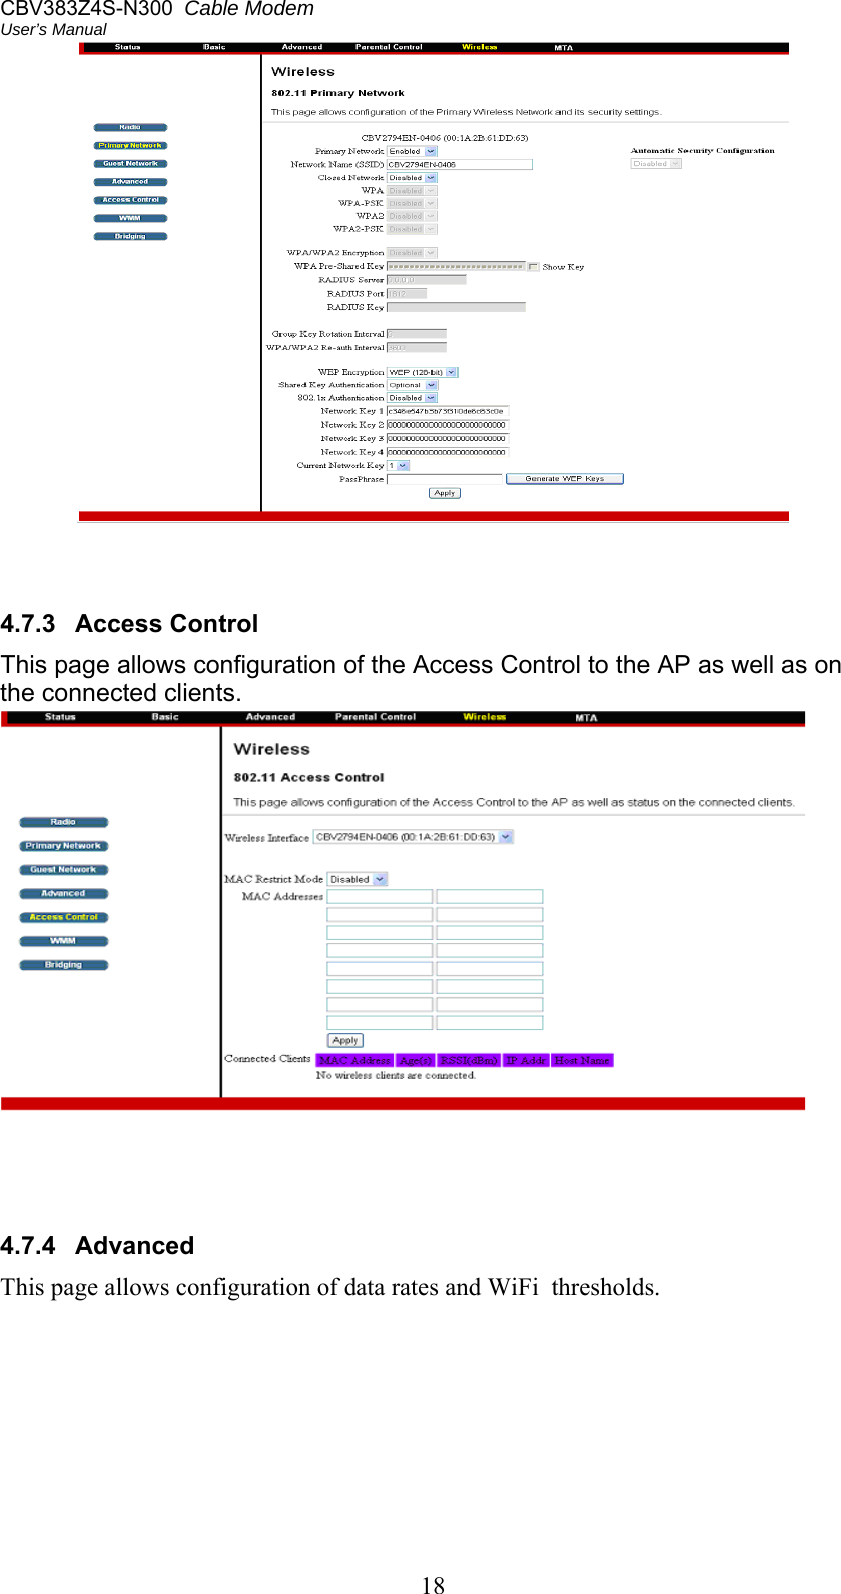 CBV383Z4S-N300  Cable Modem  User’s Manual 18     4.7.3  Access Control This page allows configuration of the Access Control to the AP as well as on the connected clients.      4.7.4  Advanced  This page allows configuration of data rates and WiFi  thresholds. 